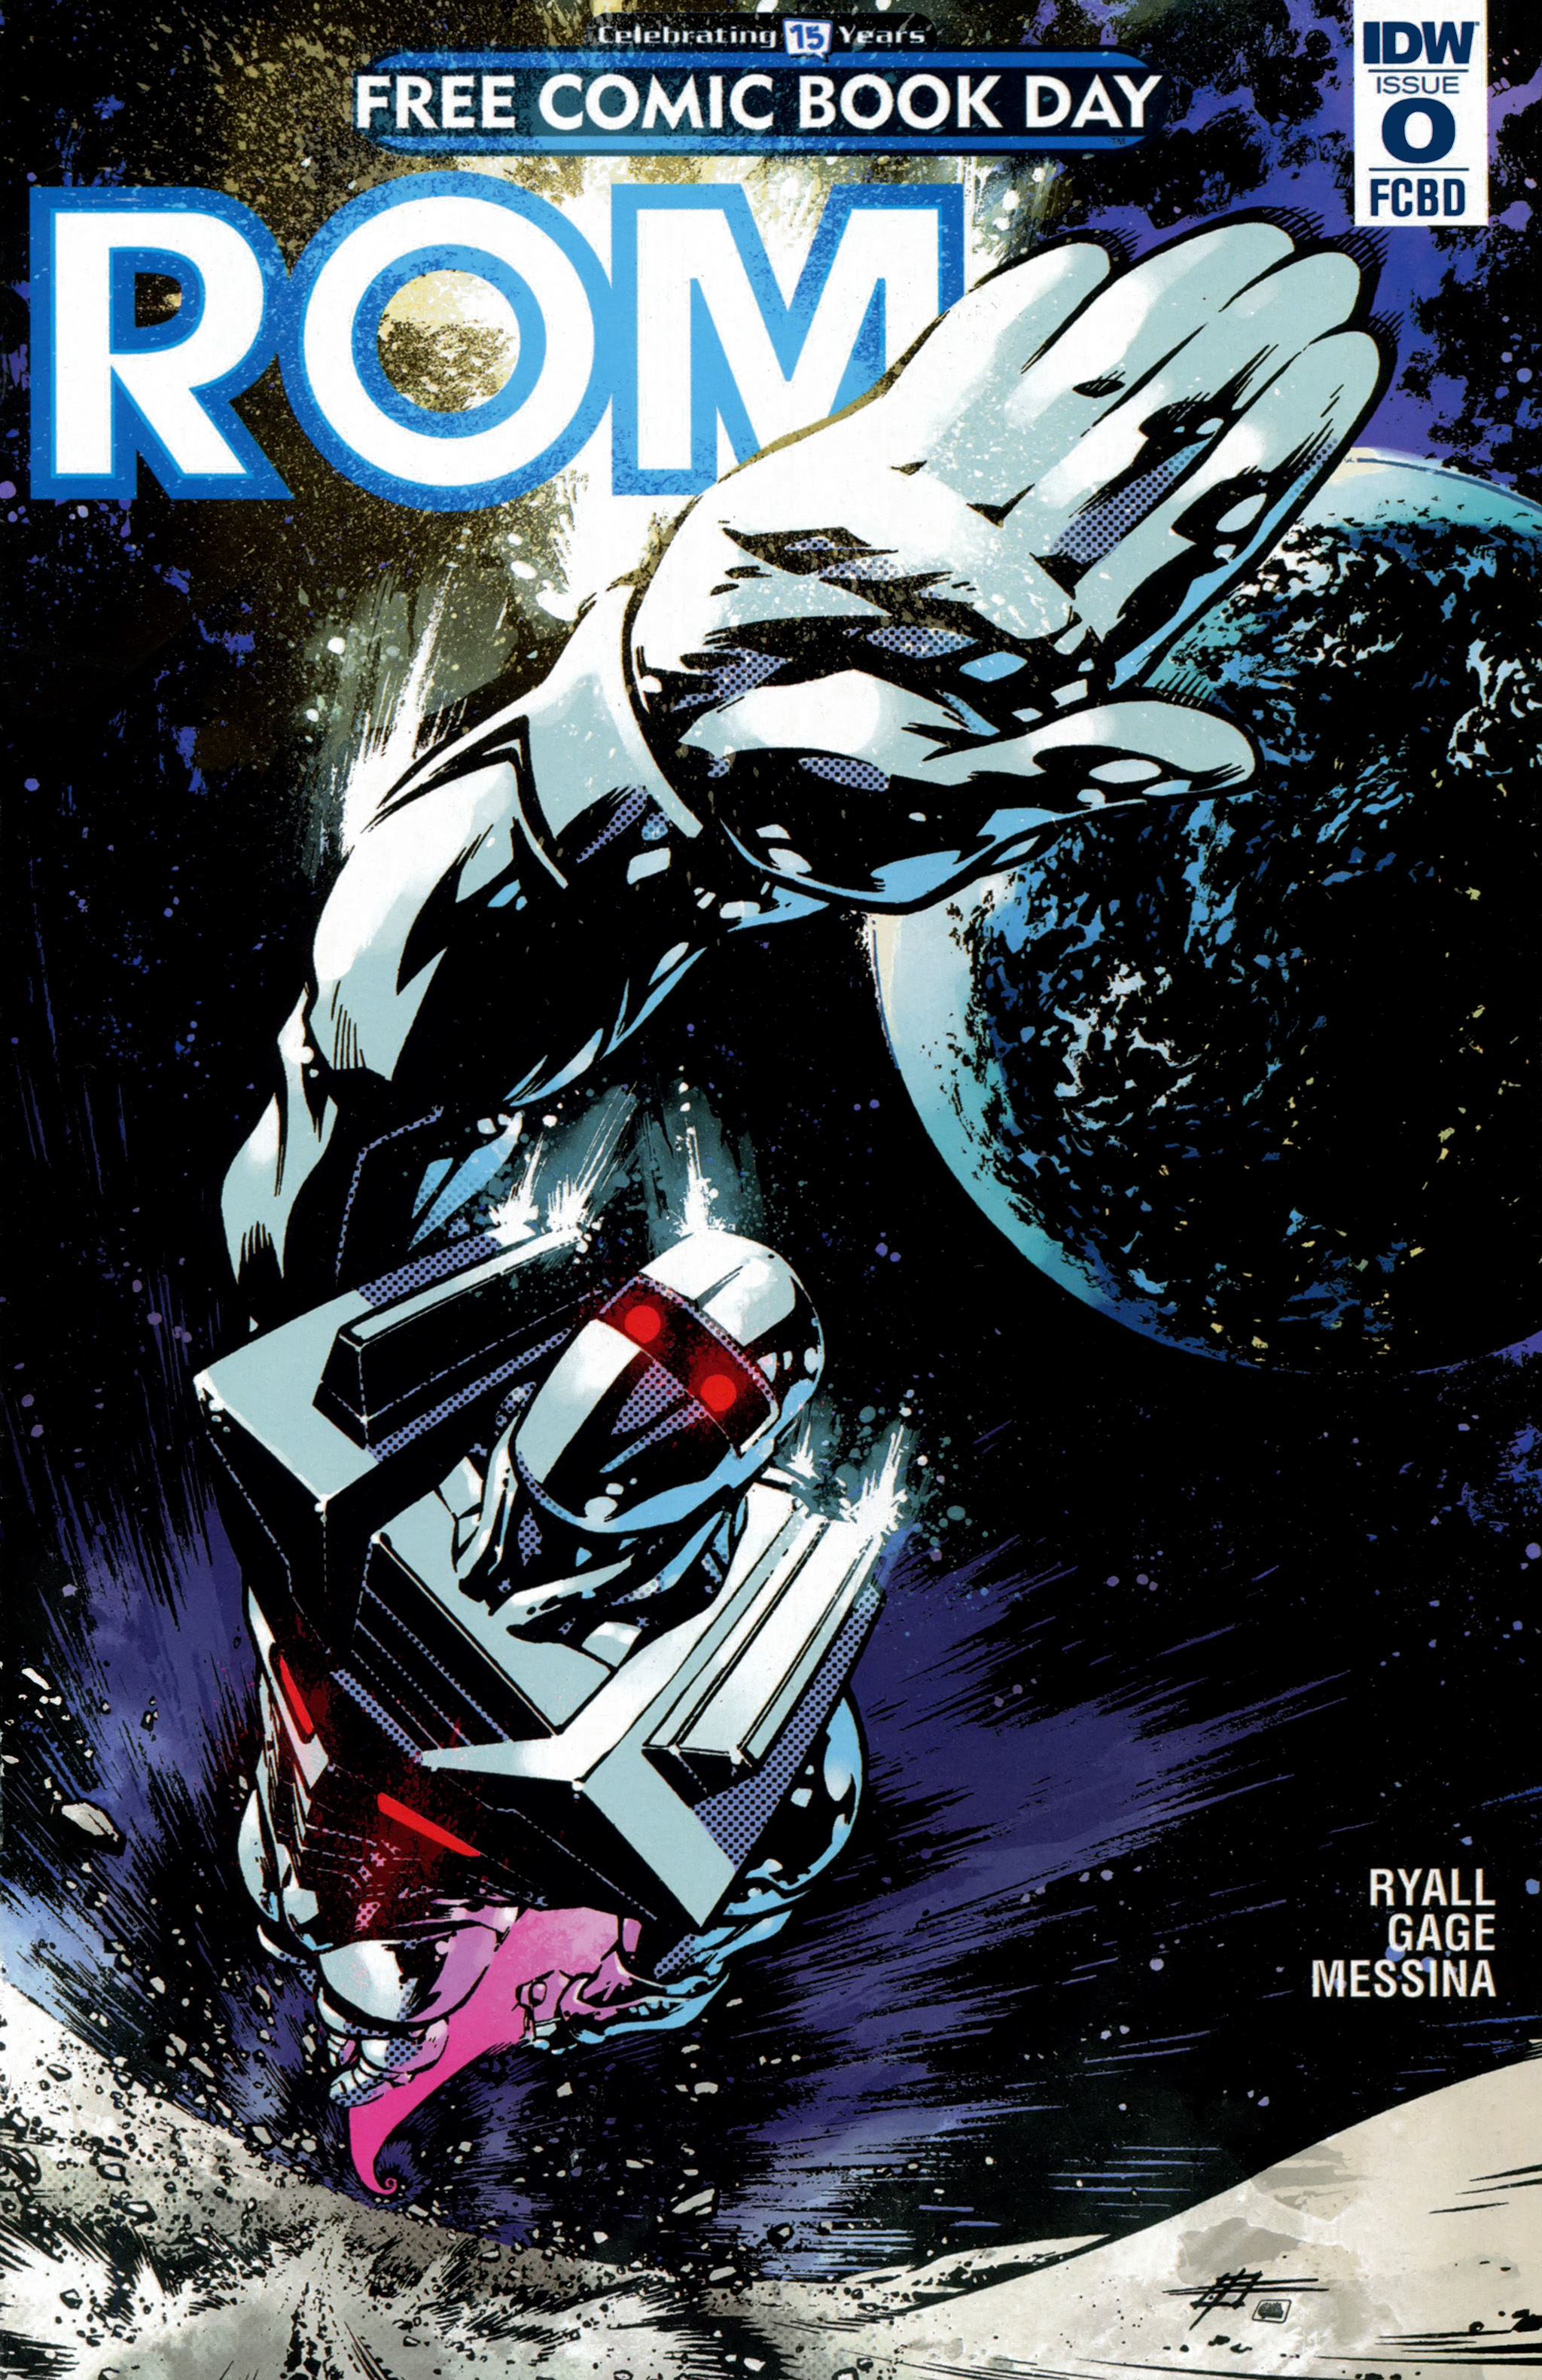 Read online Free Comic Book Day 2016 comic -  Issue # ROM - 1